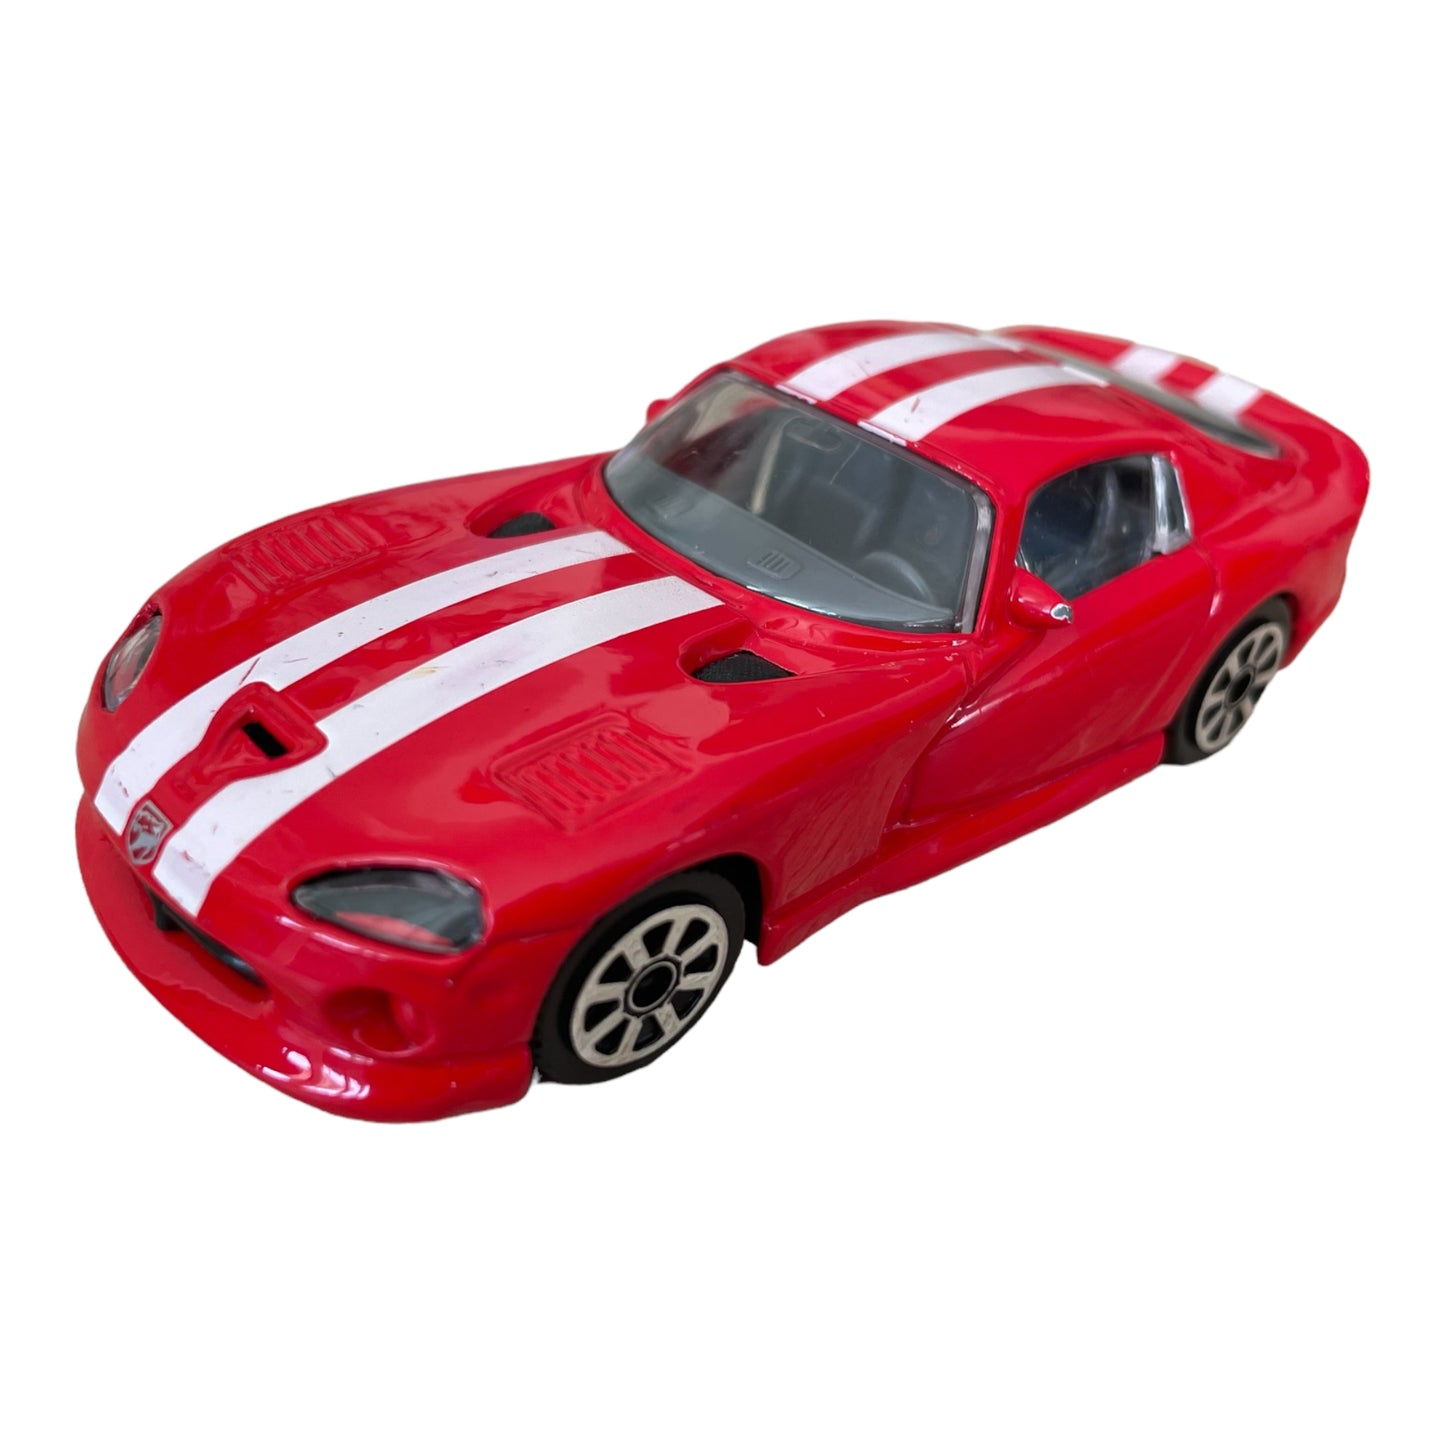 Set of 3 Iconic Cars, Viper GTS, Ford Mustang 1965, Ferrari 458 Italia 2009, Red Color